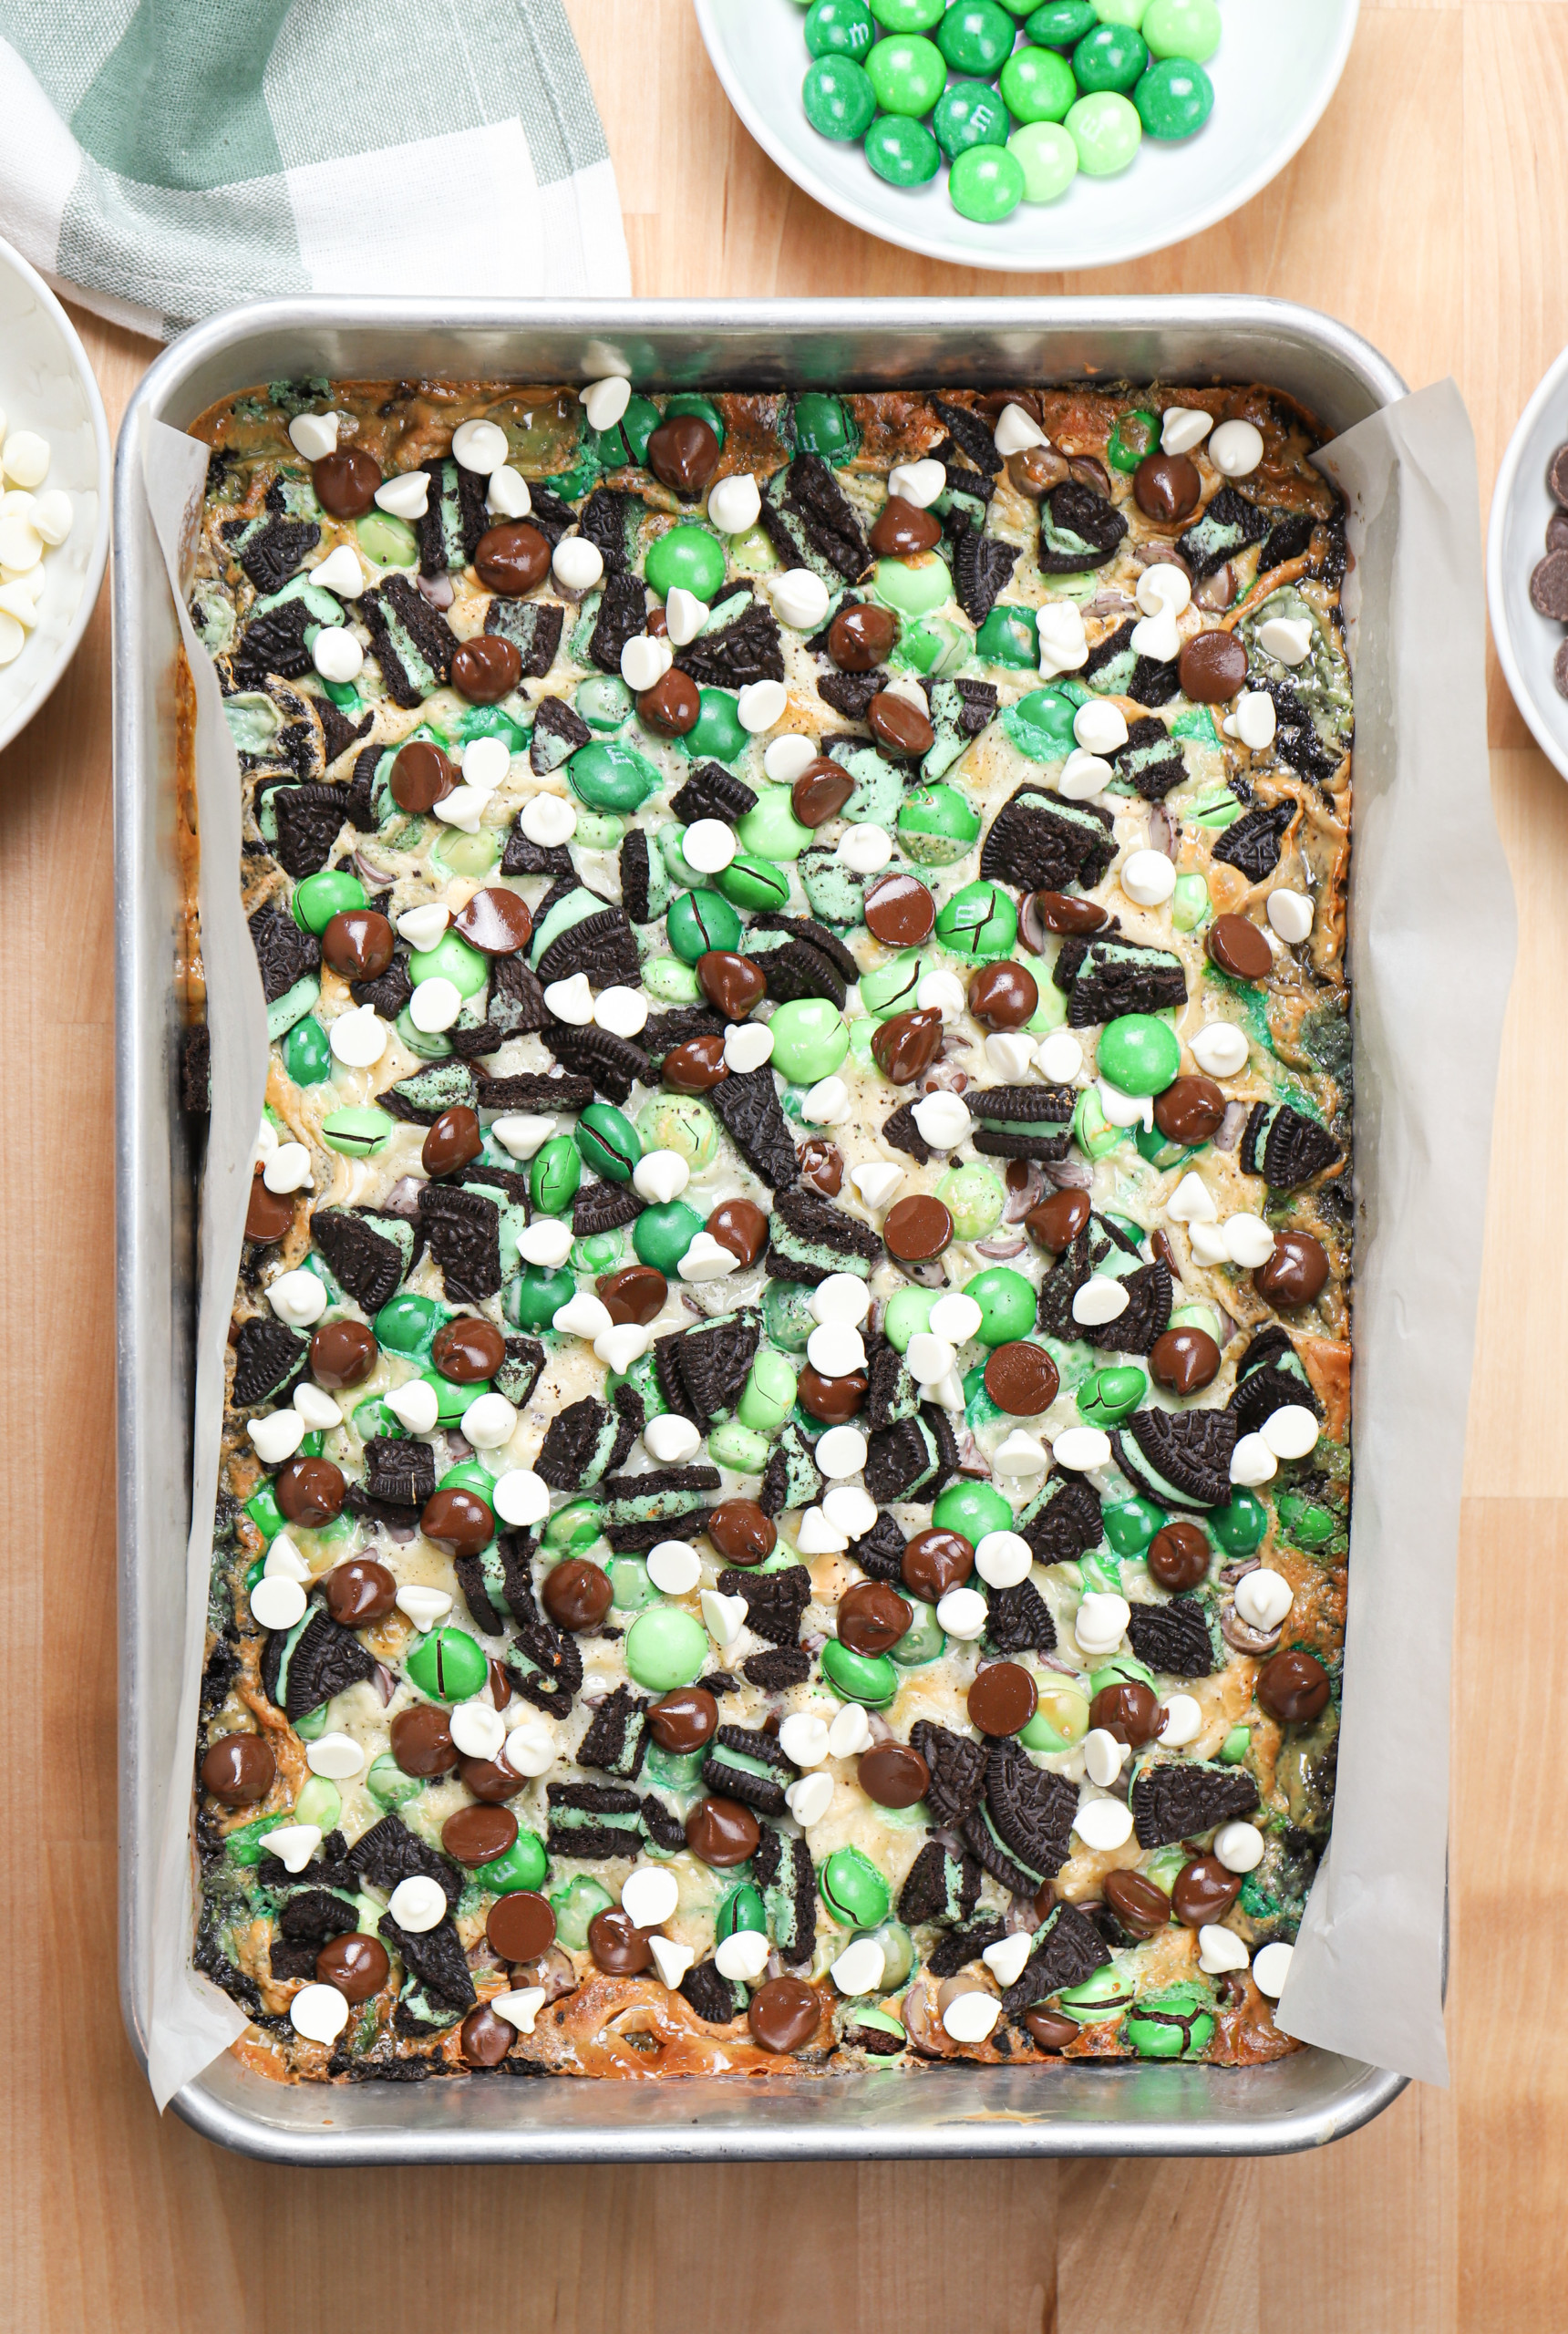 Overhead view of a batch of mint chocolate seven layer bars right out of the oven before cutting into pieces.